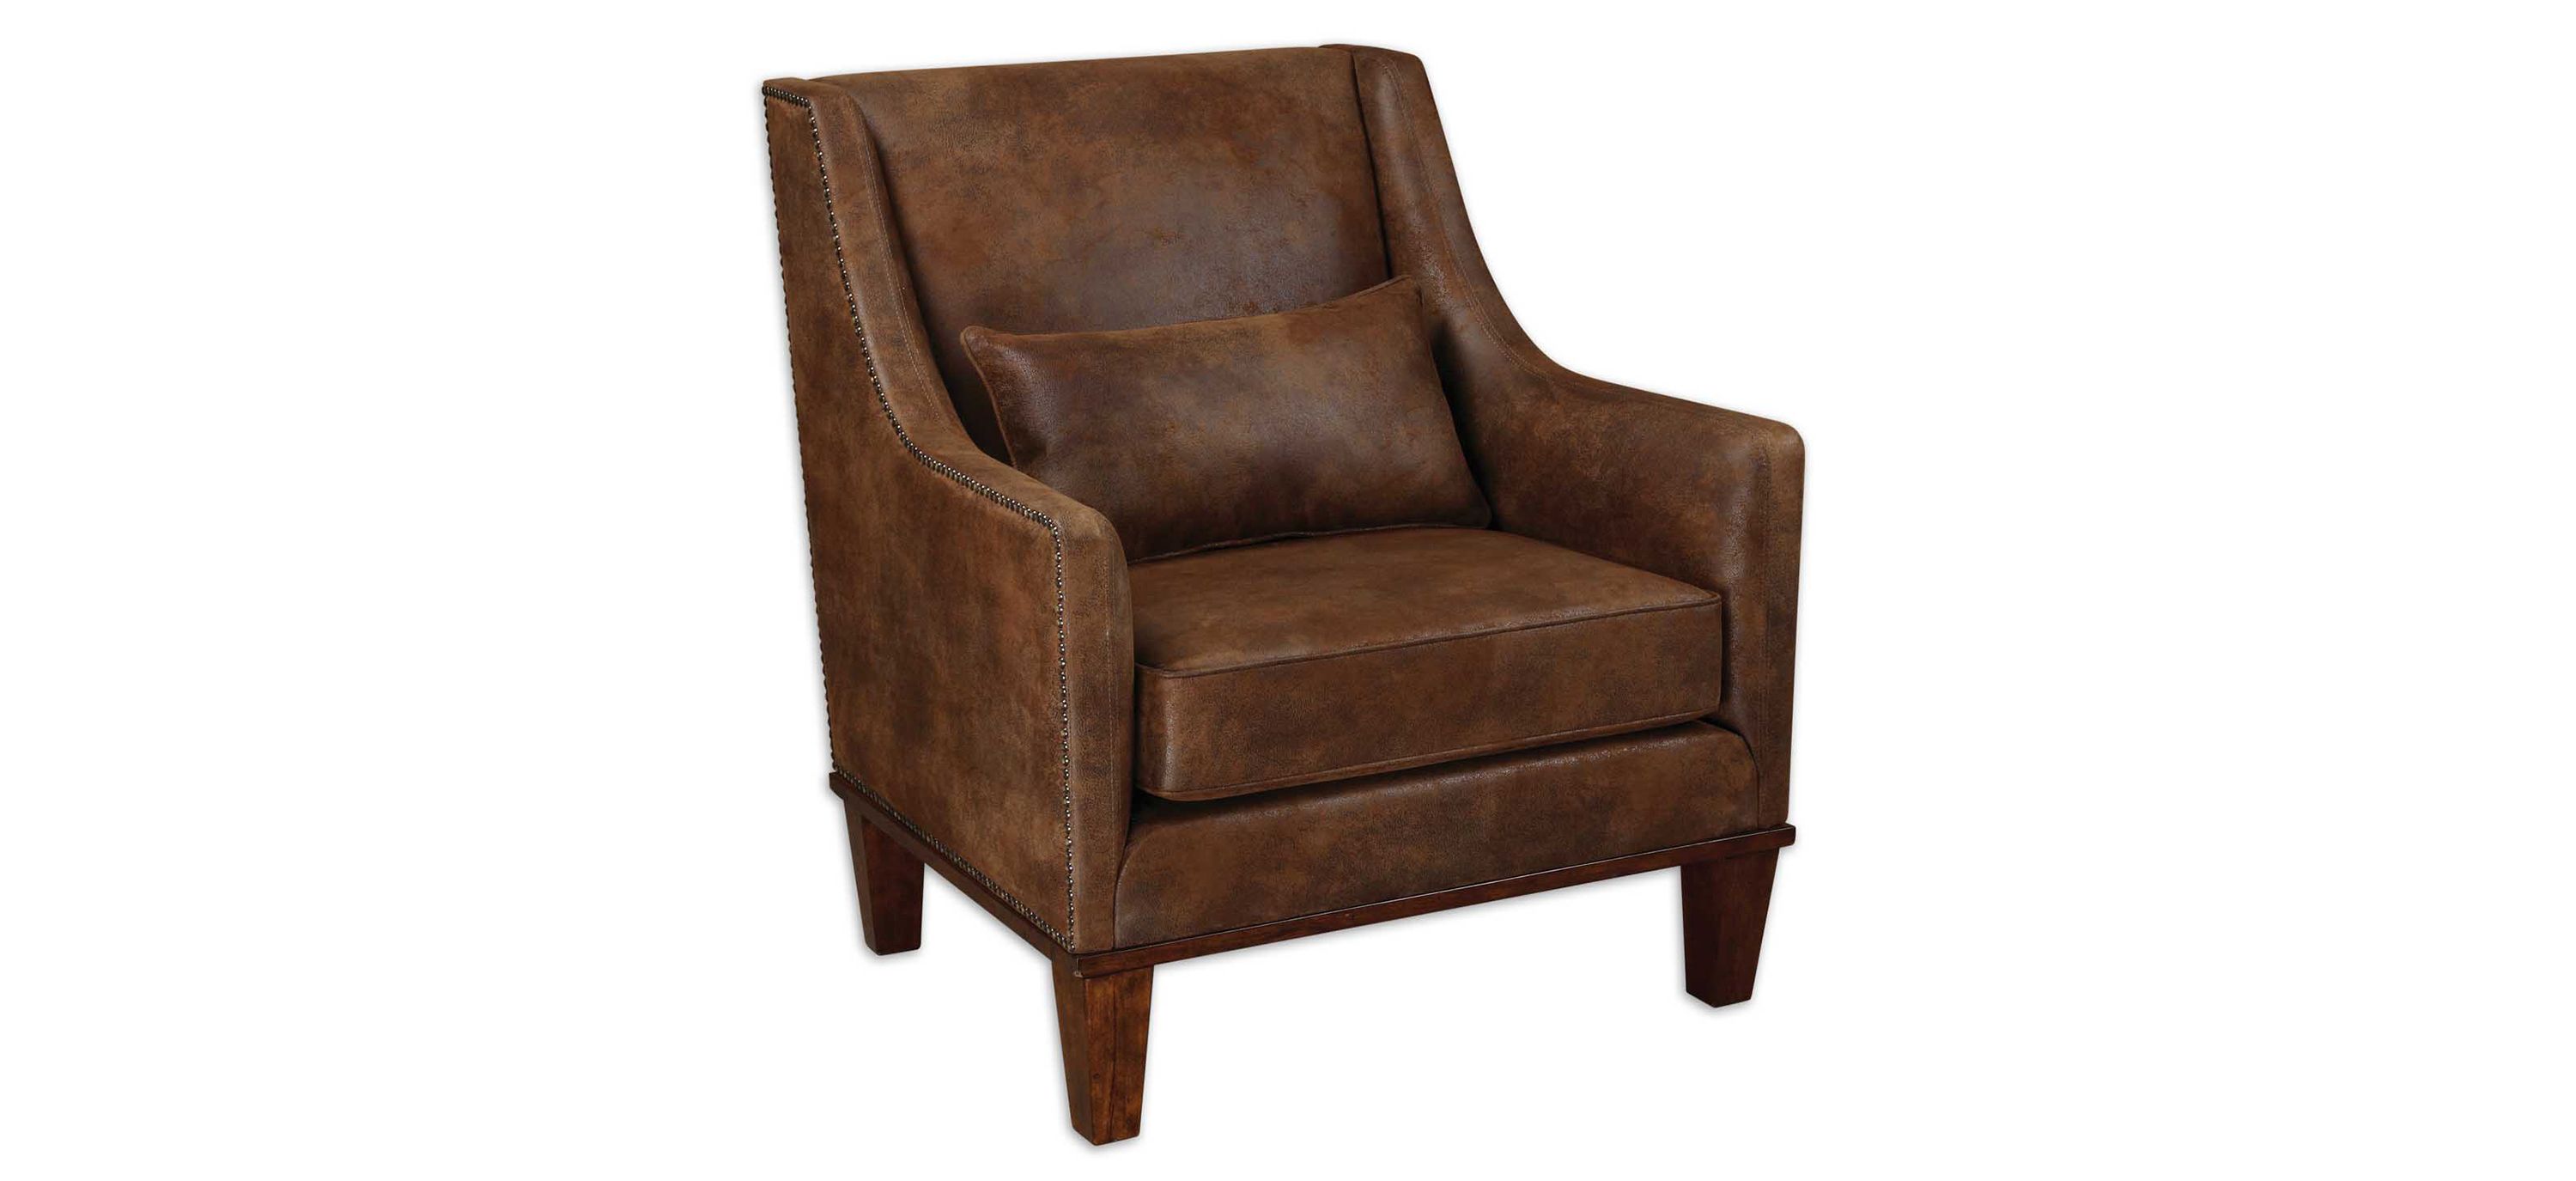 Clay Faux Leather Accent Chair